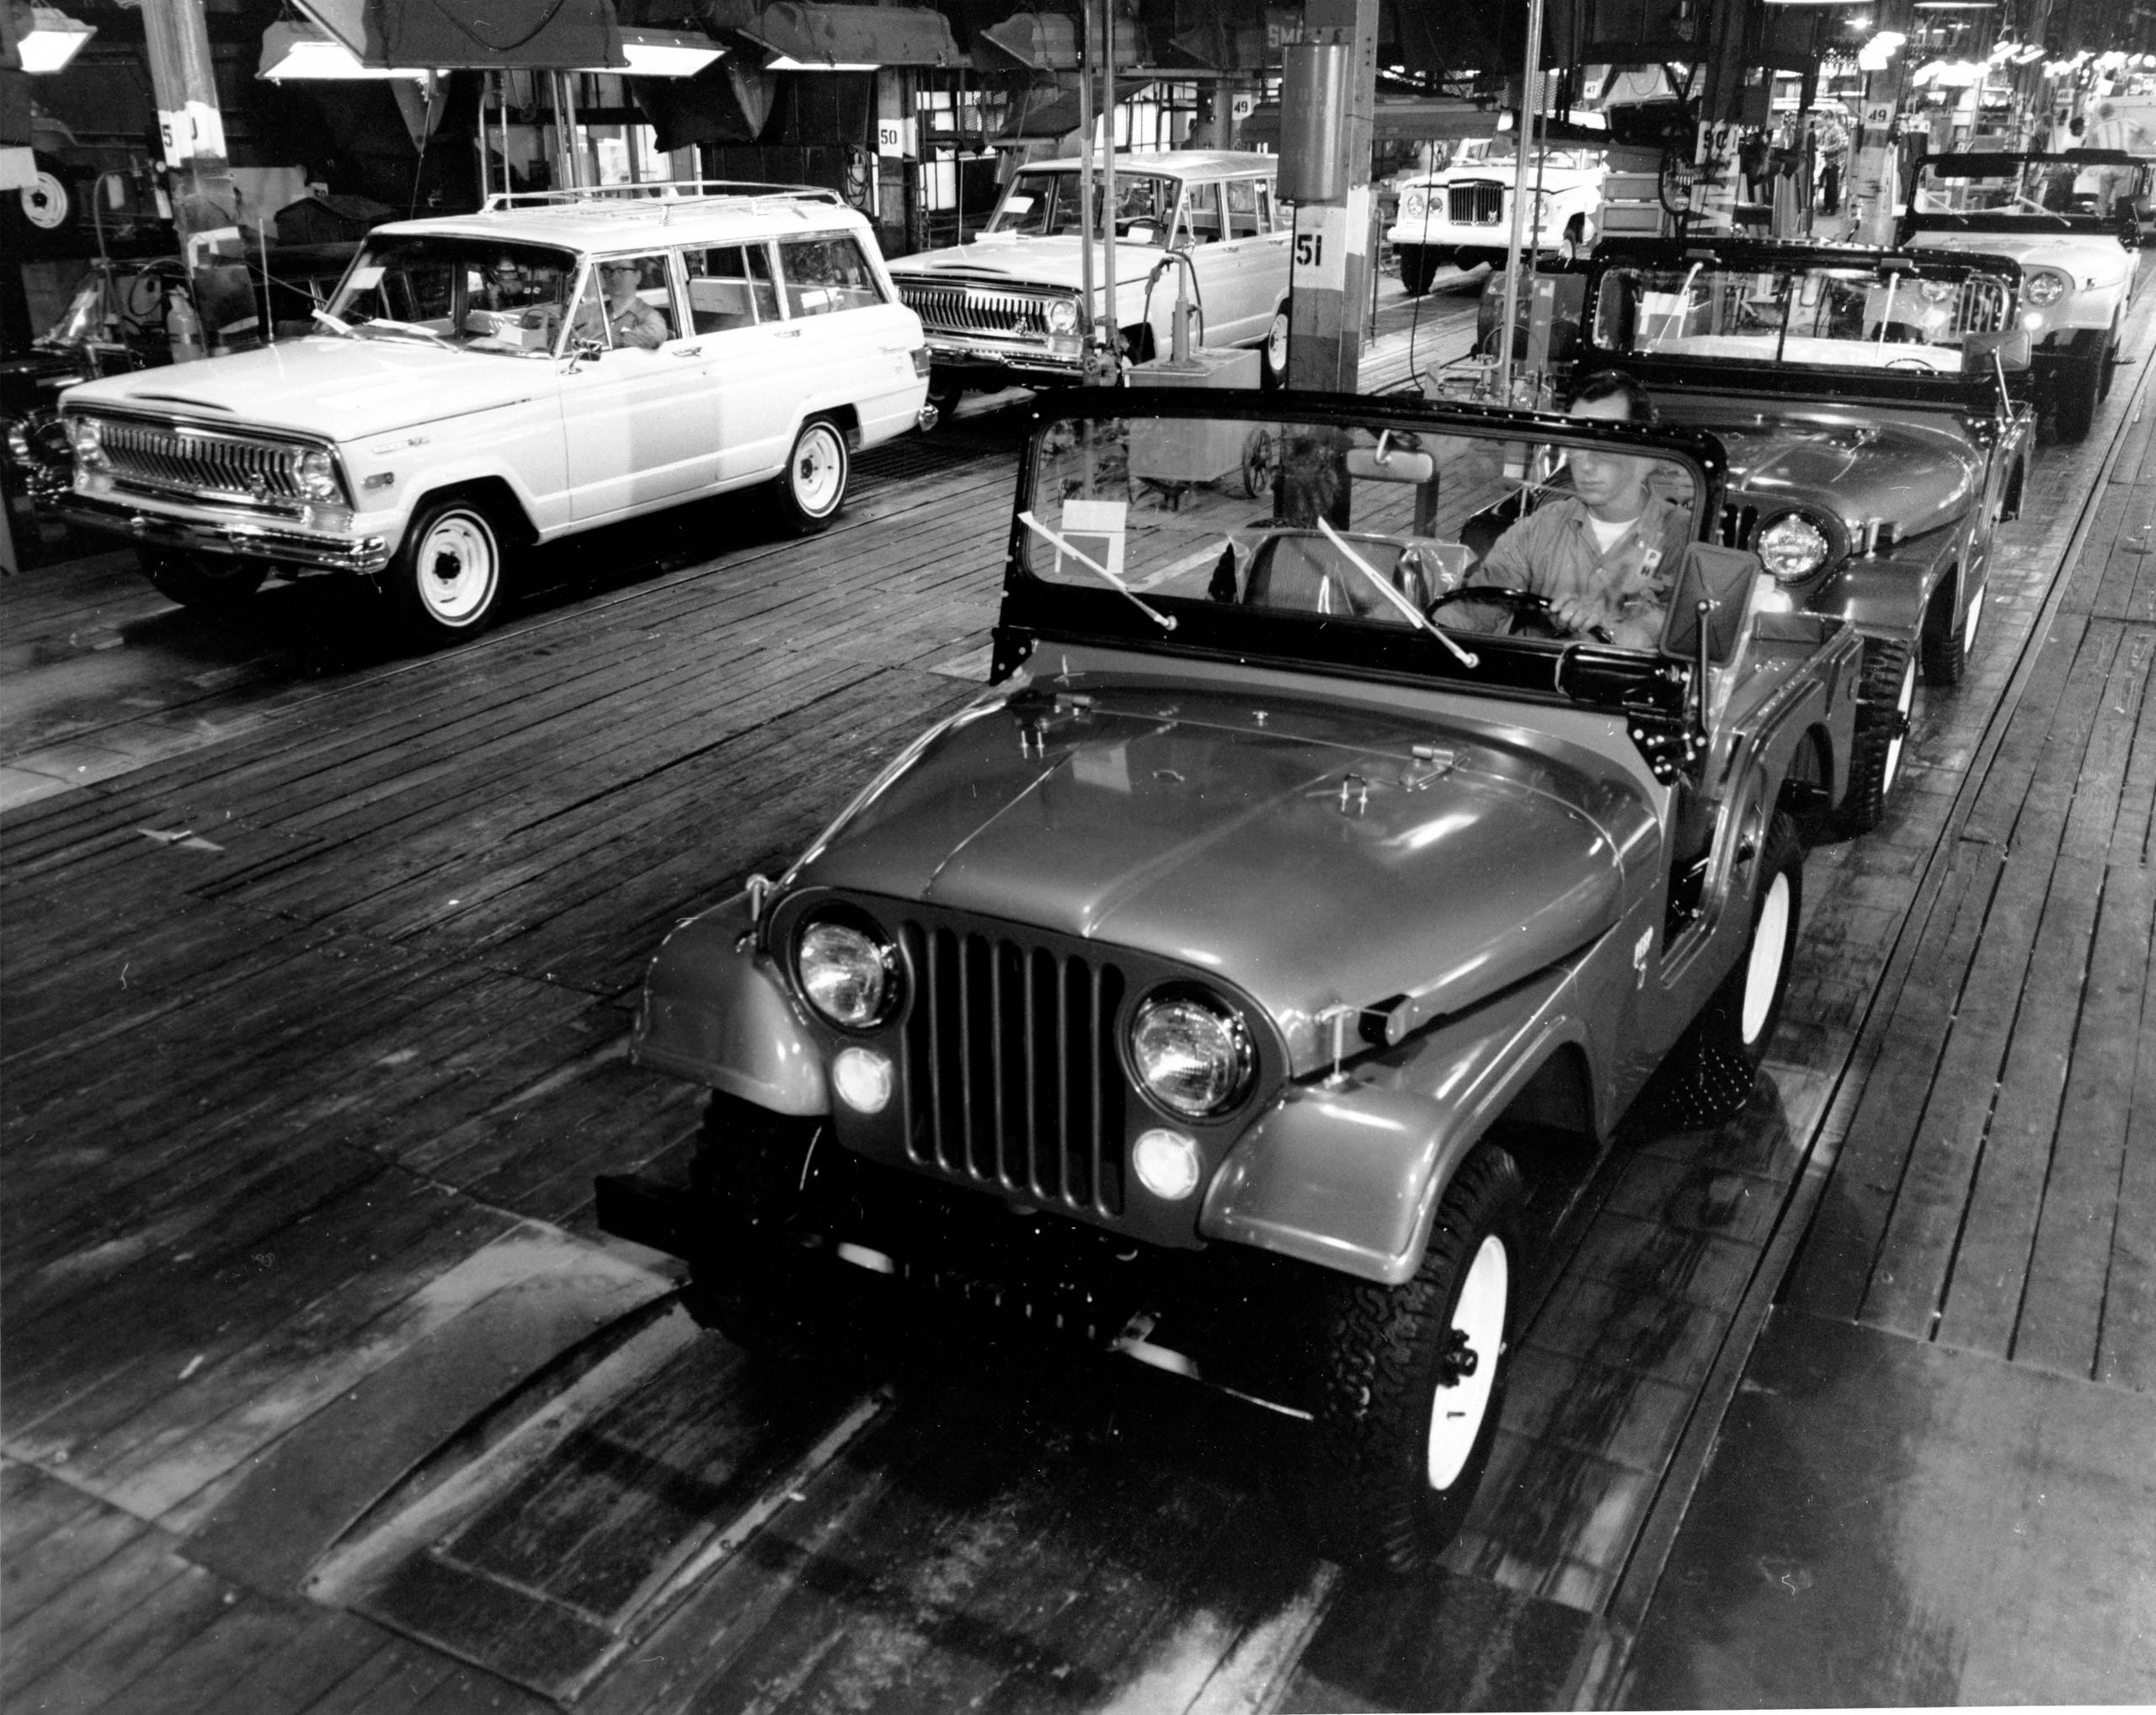 Two models come off the Jeep assembly line in Toledo in 1964.